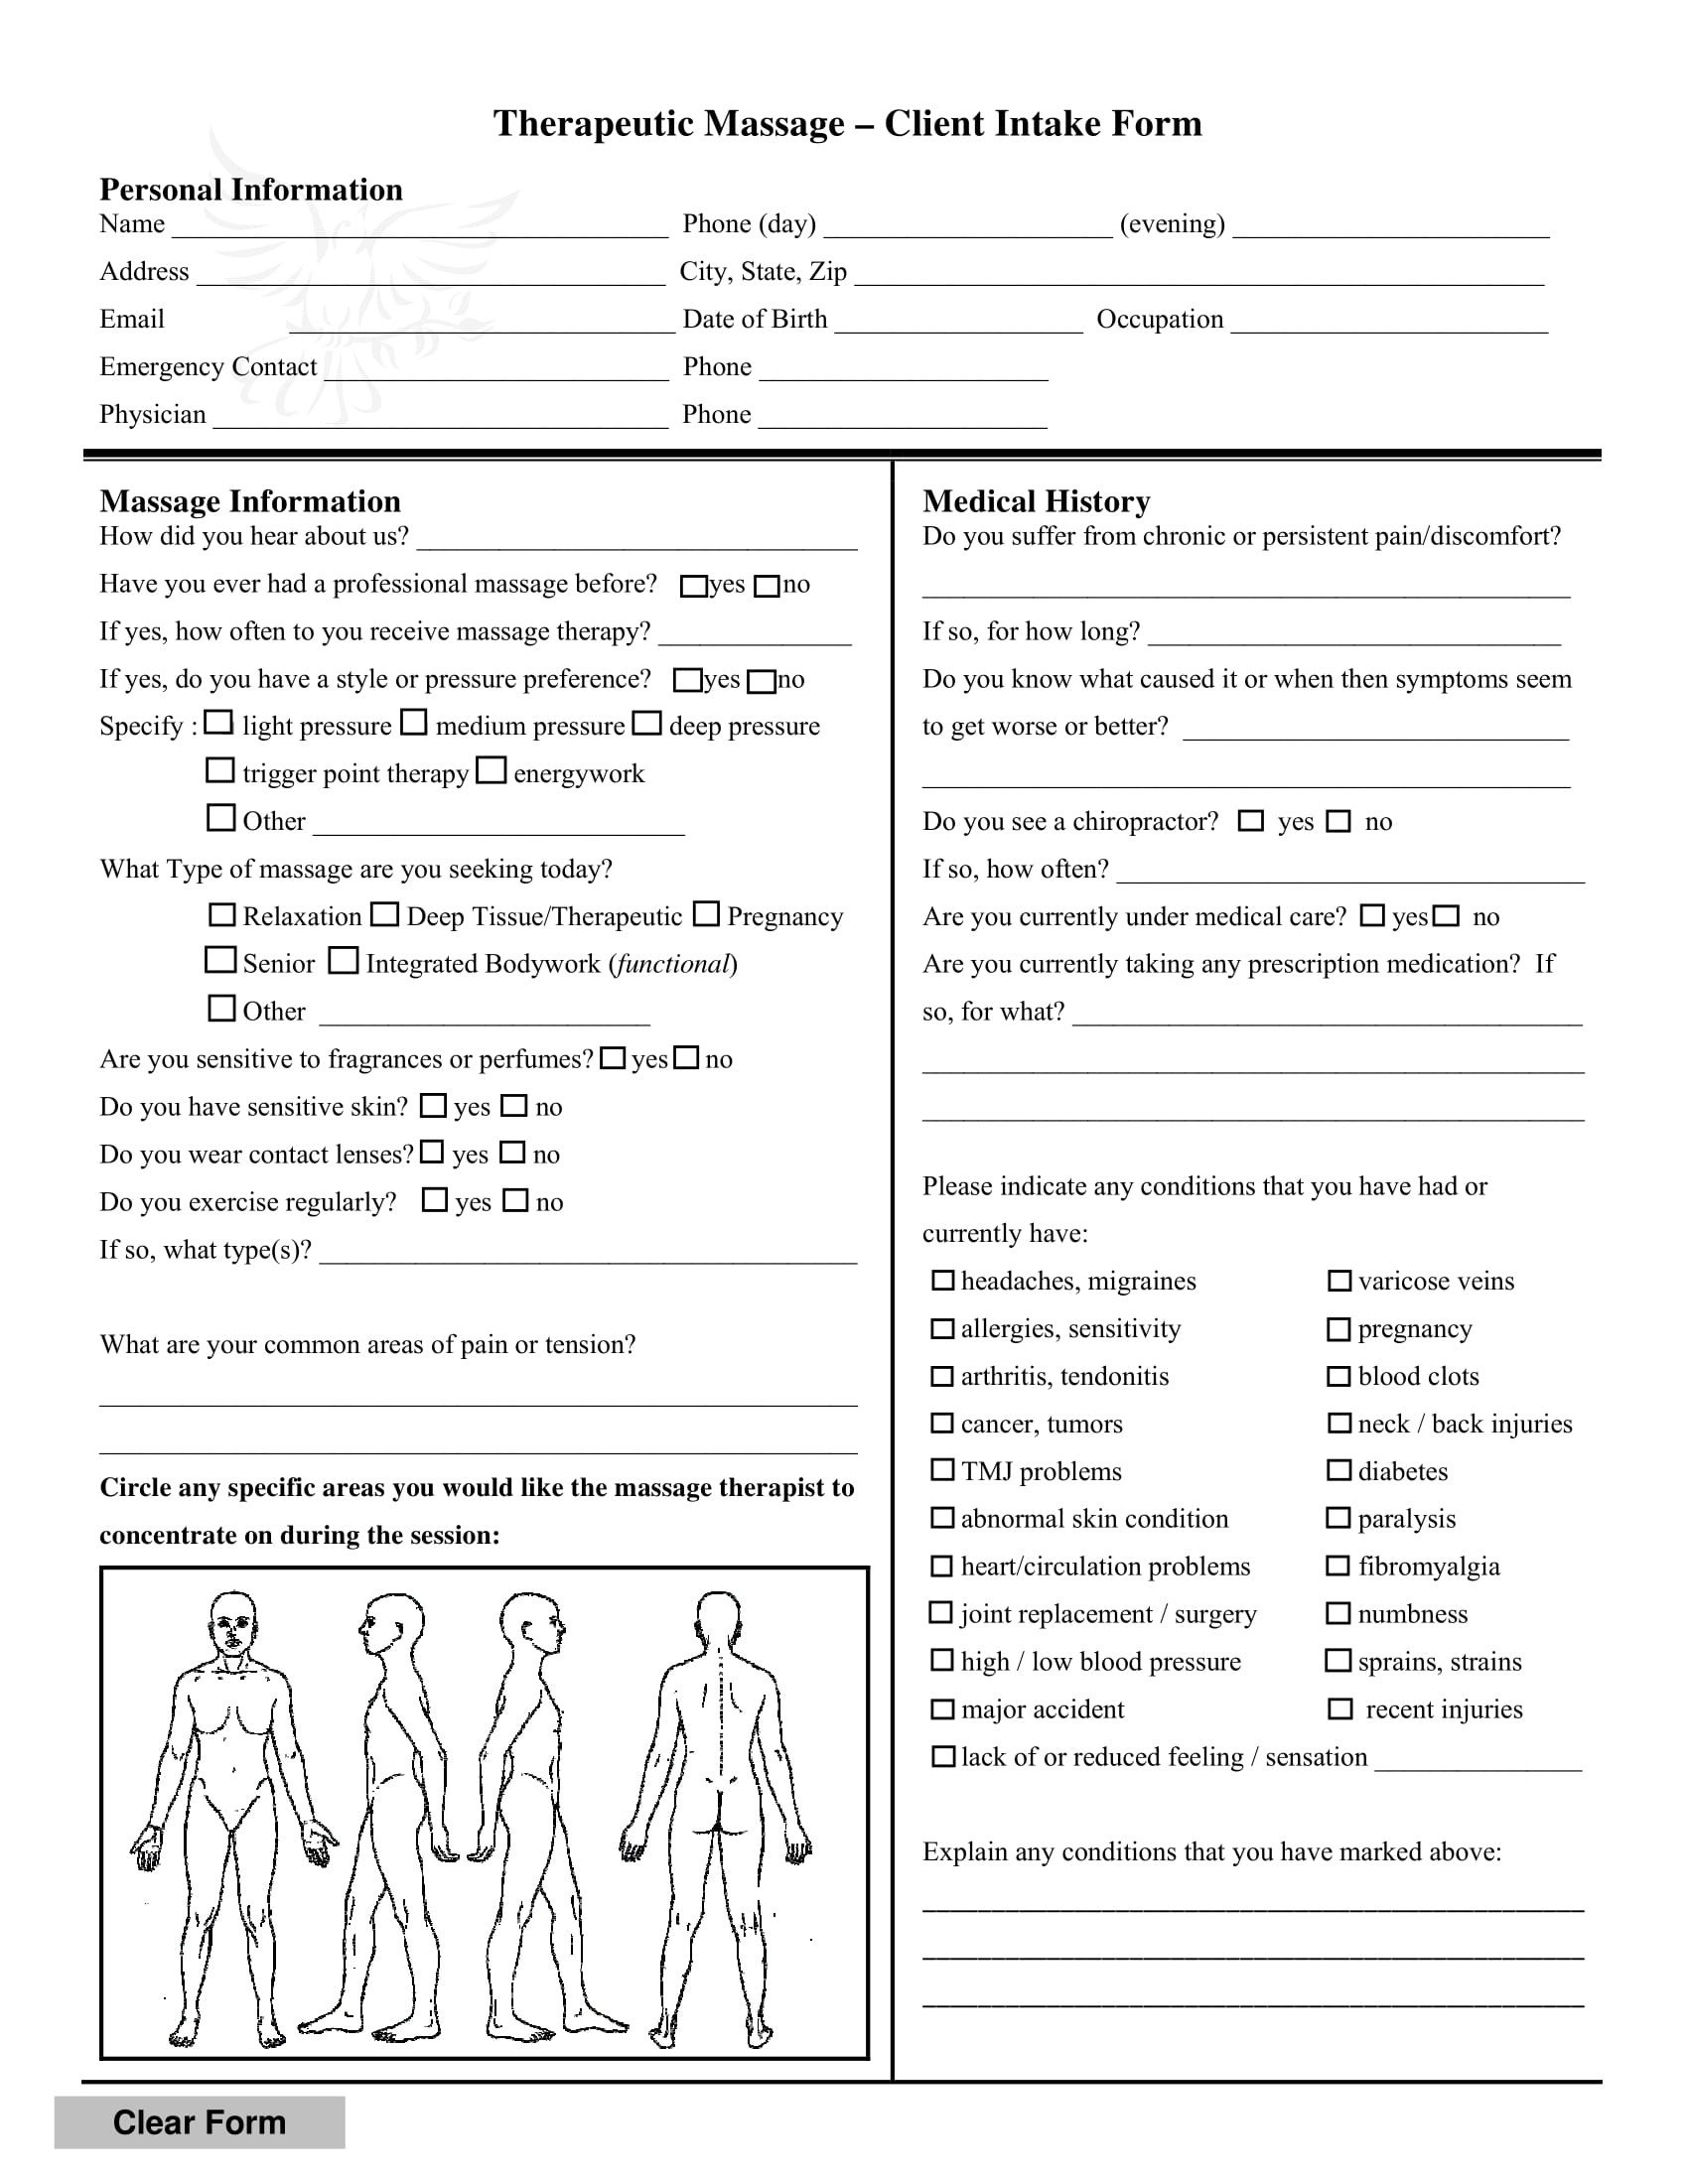 Simple Massage Intake form 13 Client Intake forms Pdf Doc